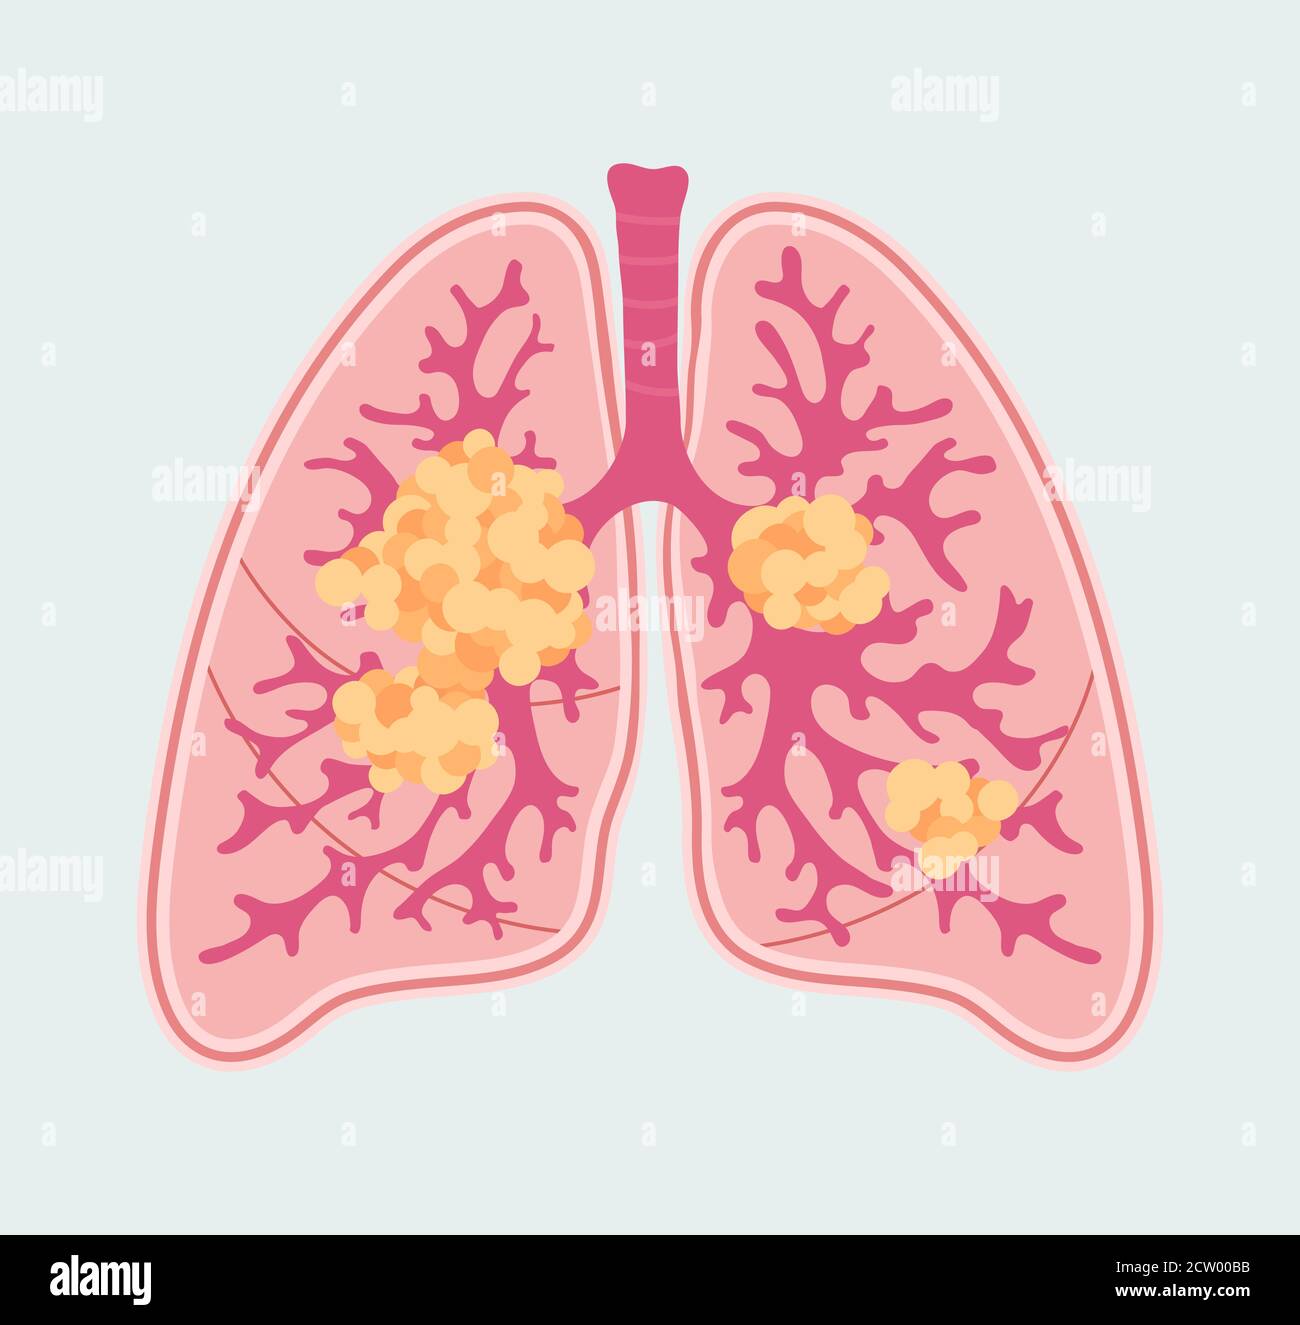 Patient-friendly scheme of Lung Cancer. Anatomical Diagram of tumor and metastasis in respiratory organs Stock Vector